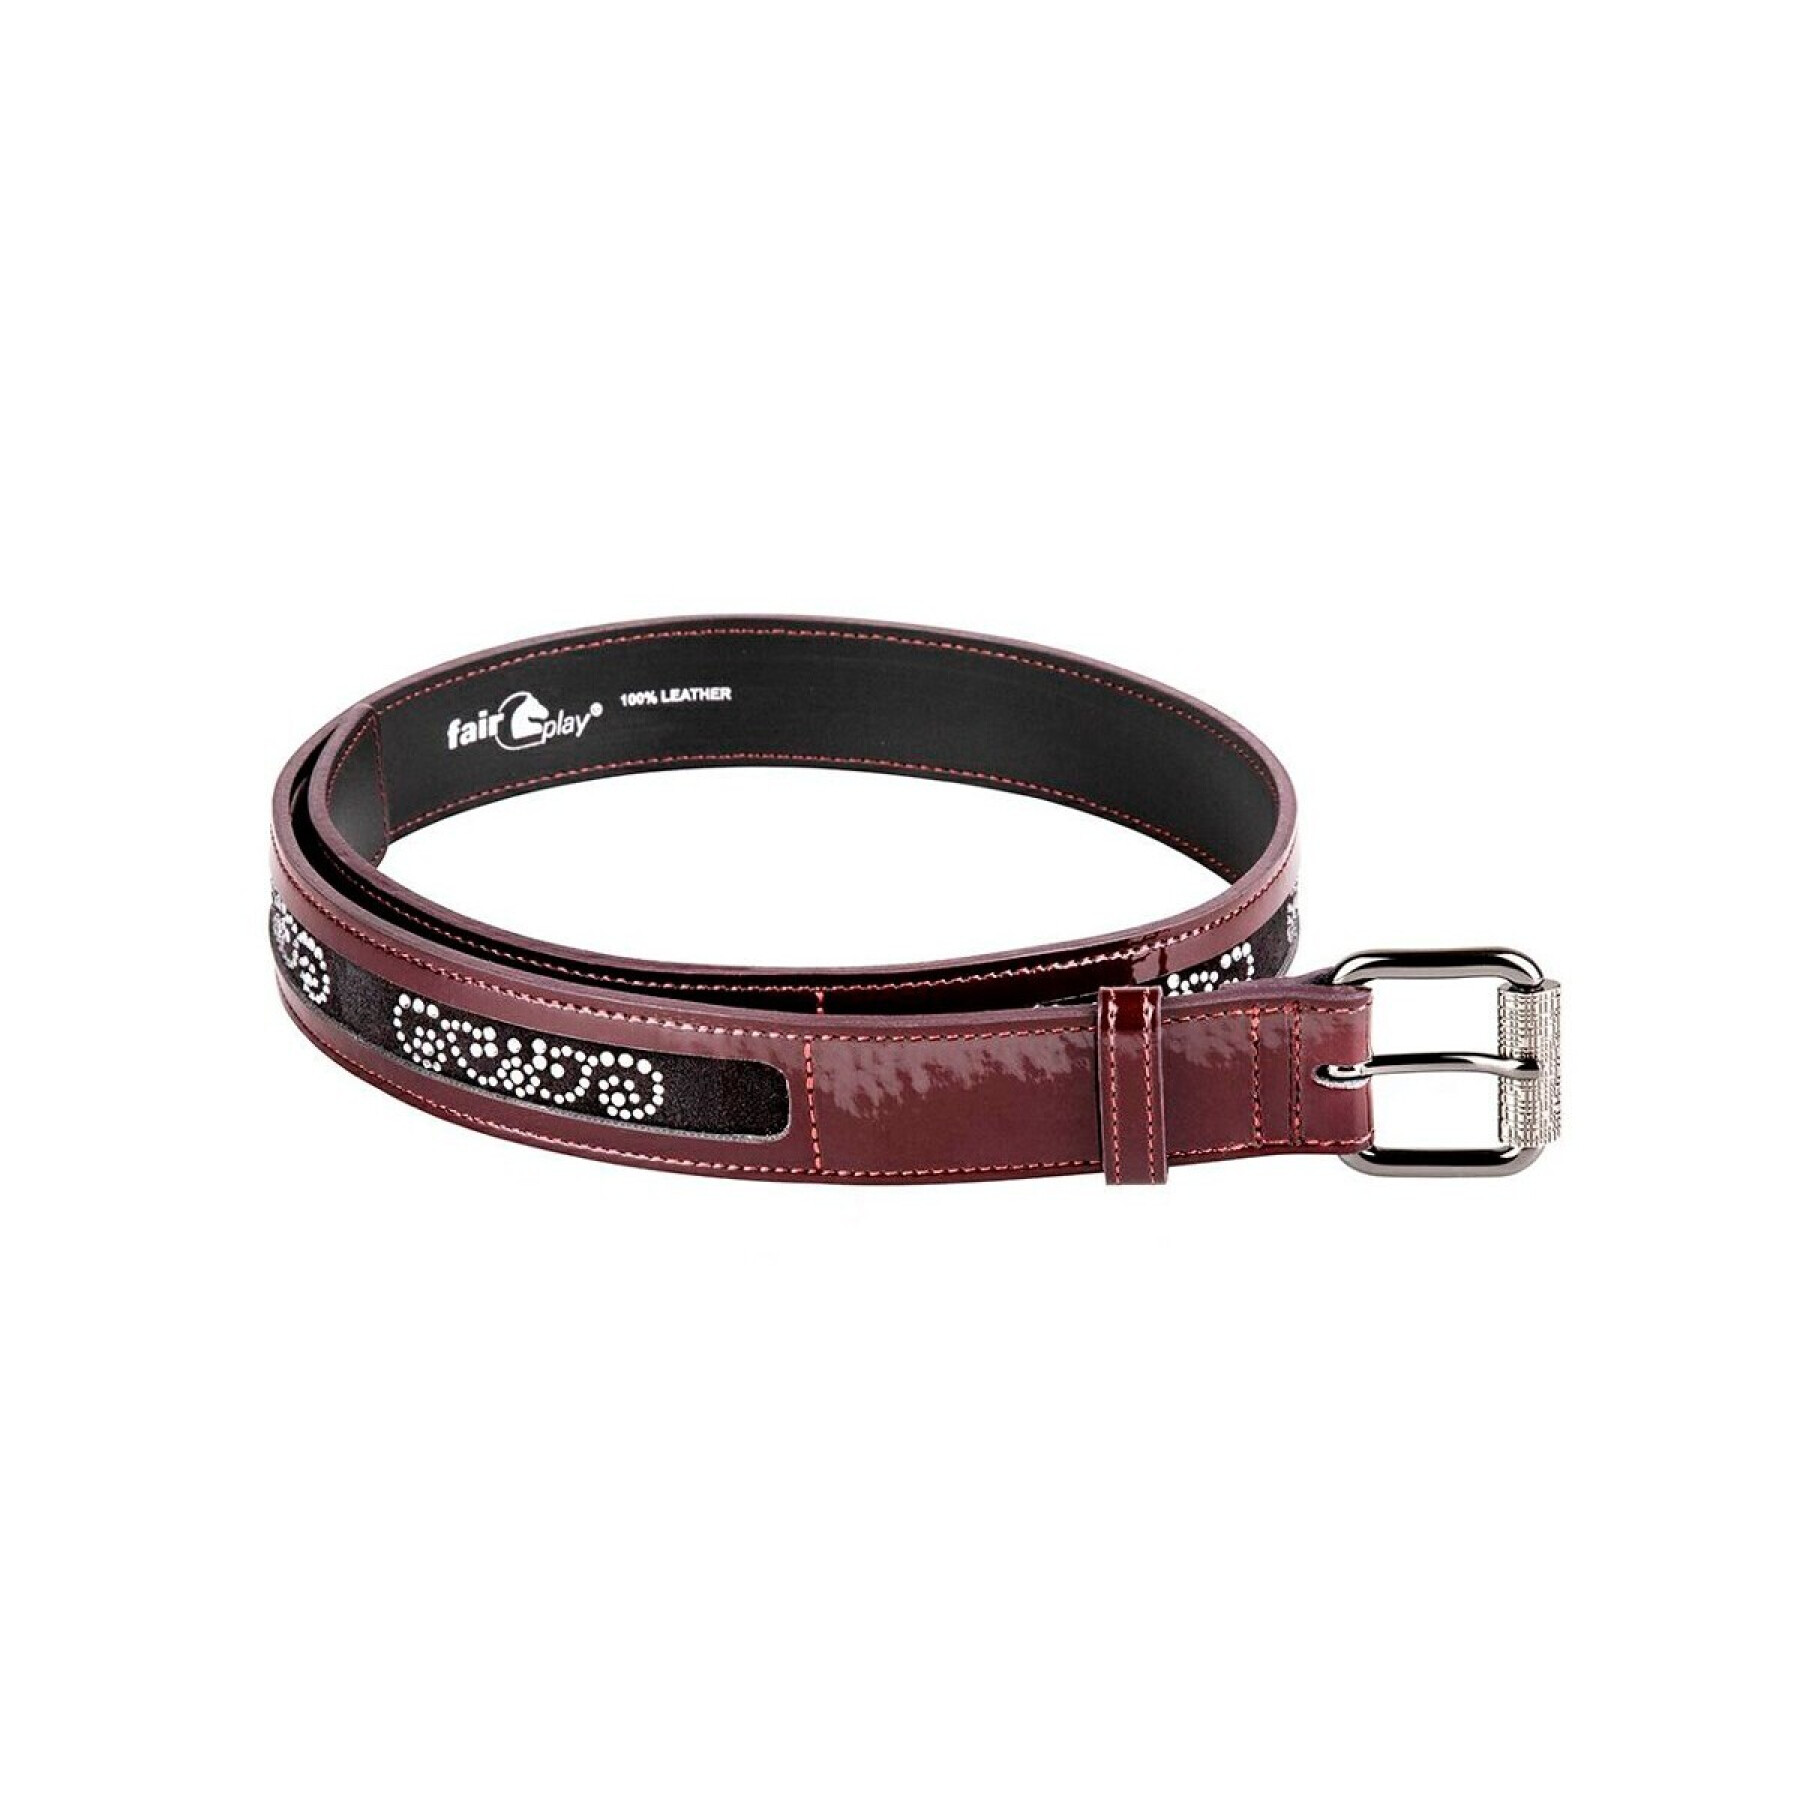 Leather belt Fair Play Clarence Chic